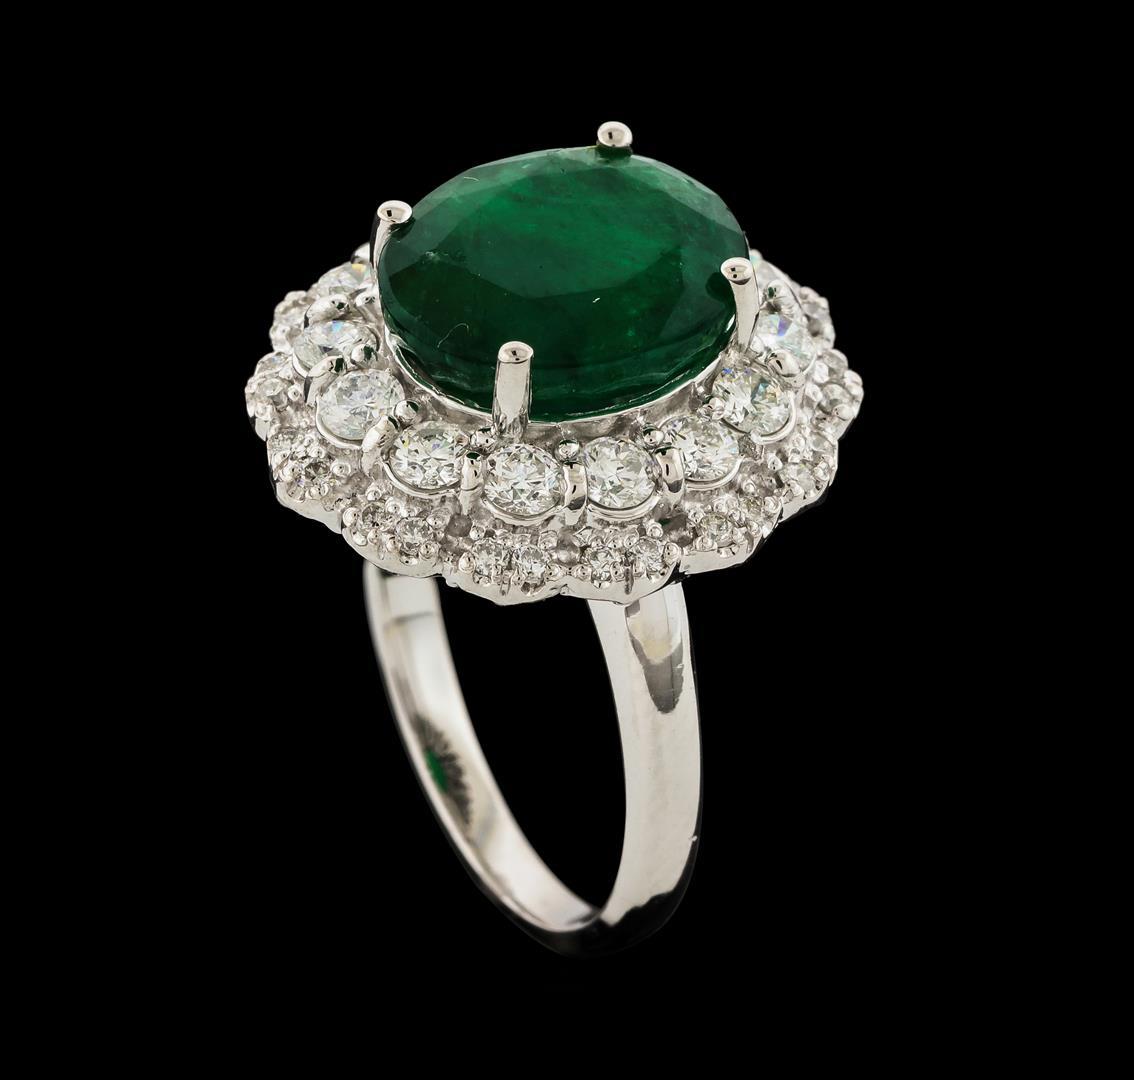 6.06 ctw Emerald and Diamond Ring - 14KT White Gold